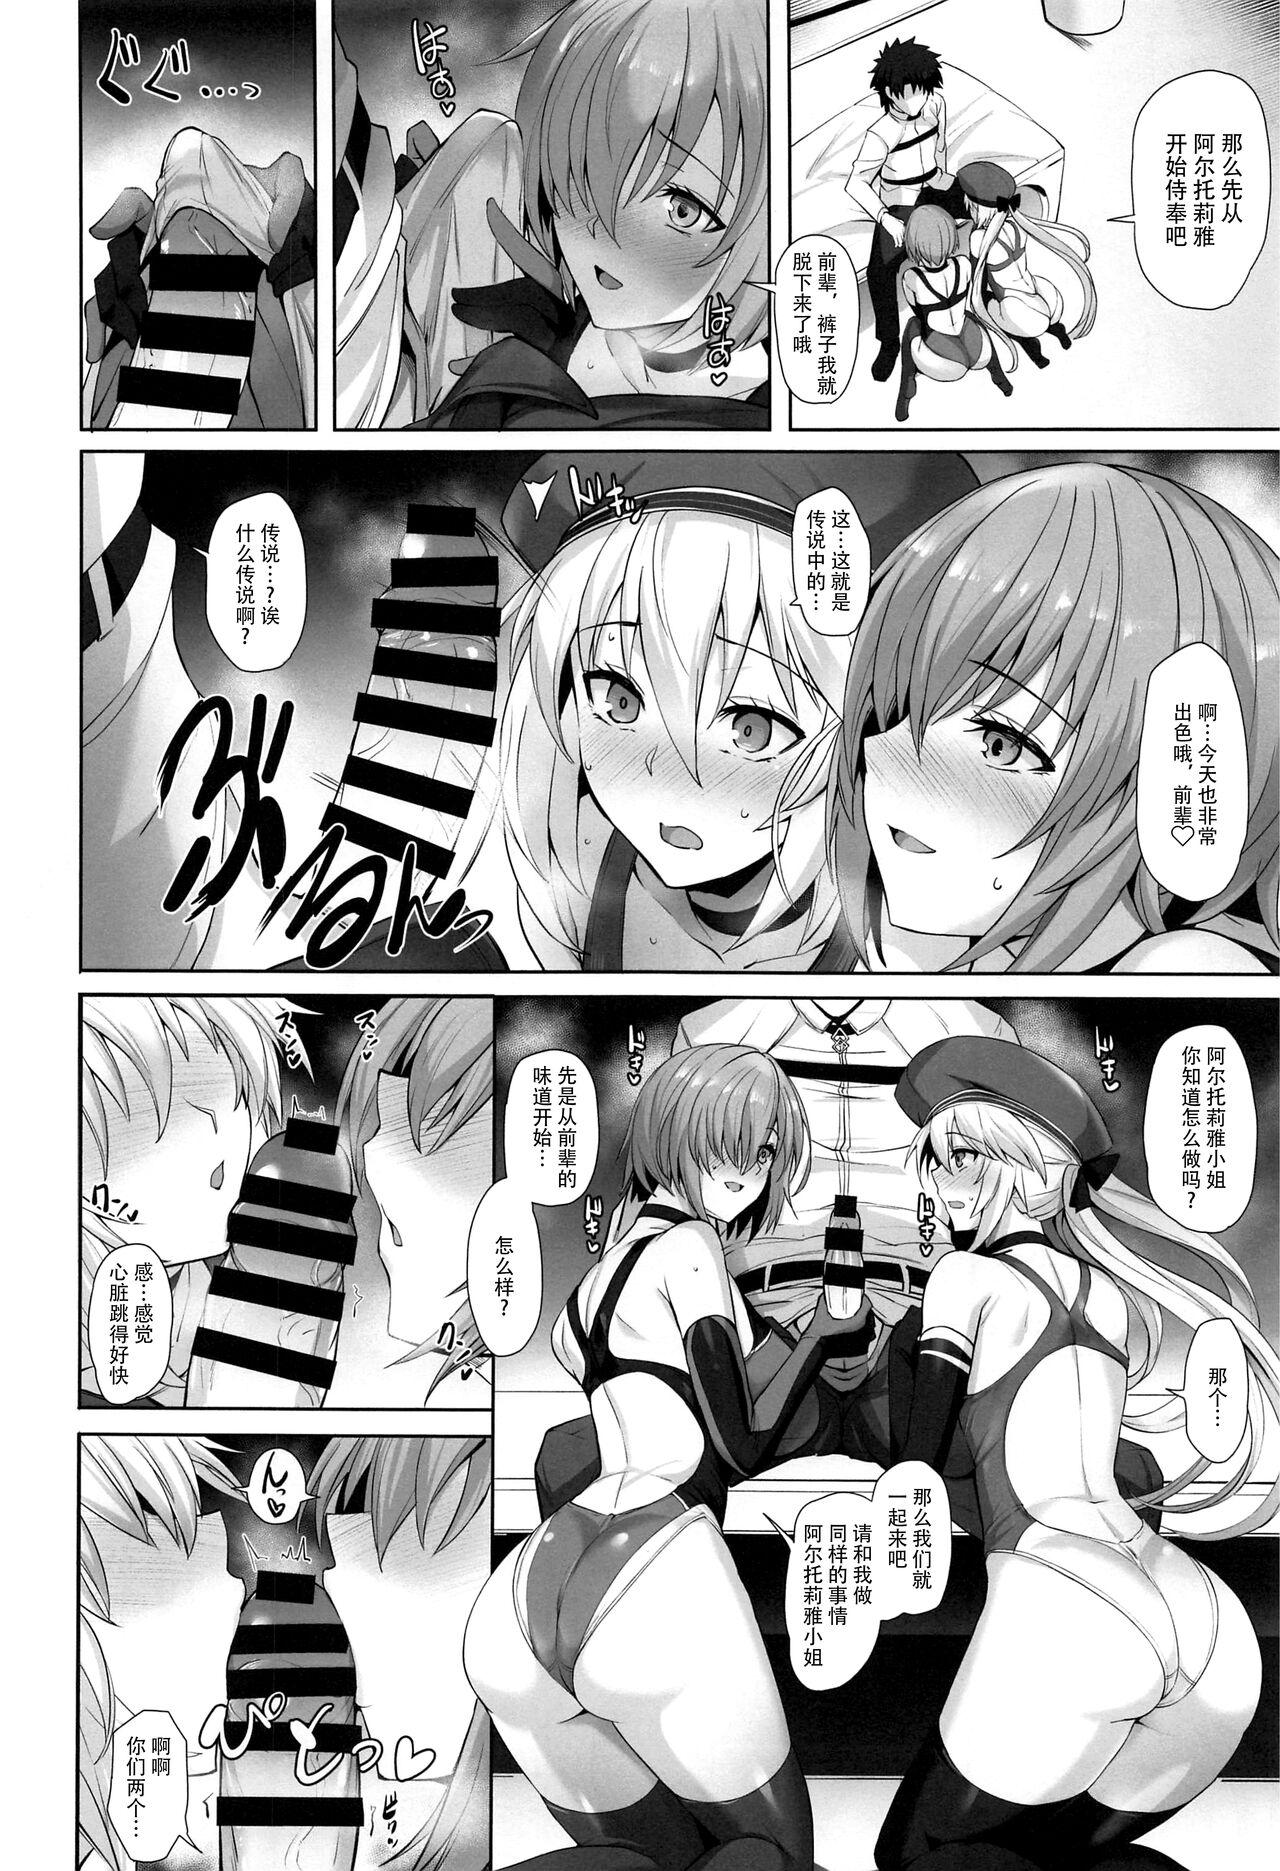 Maid Kyouei Tokusei no Servant to 2 - Fate grand order Livesex - Page 5